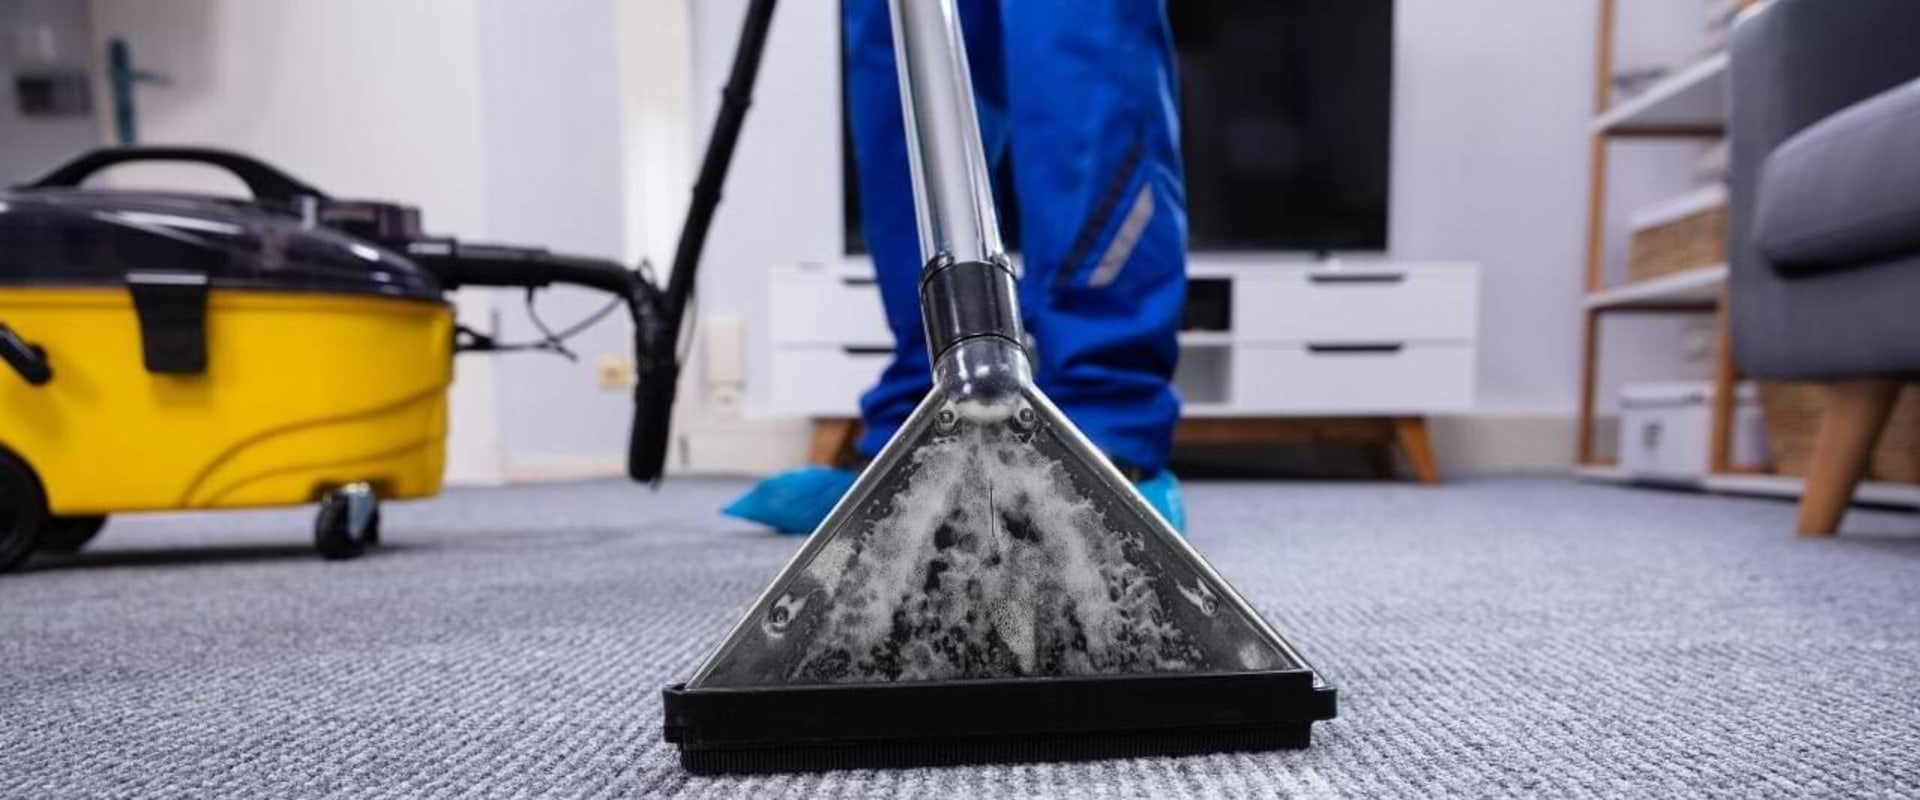 What do professional carpet cleaners use to clean carpets?